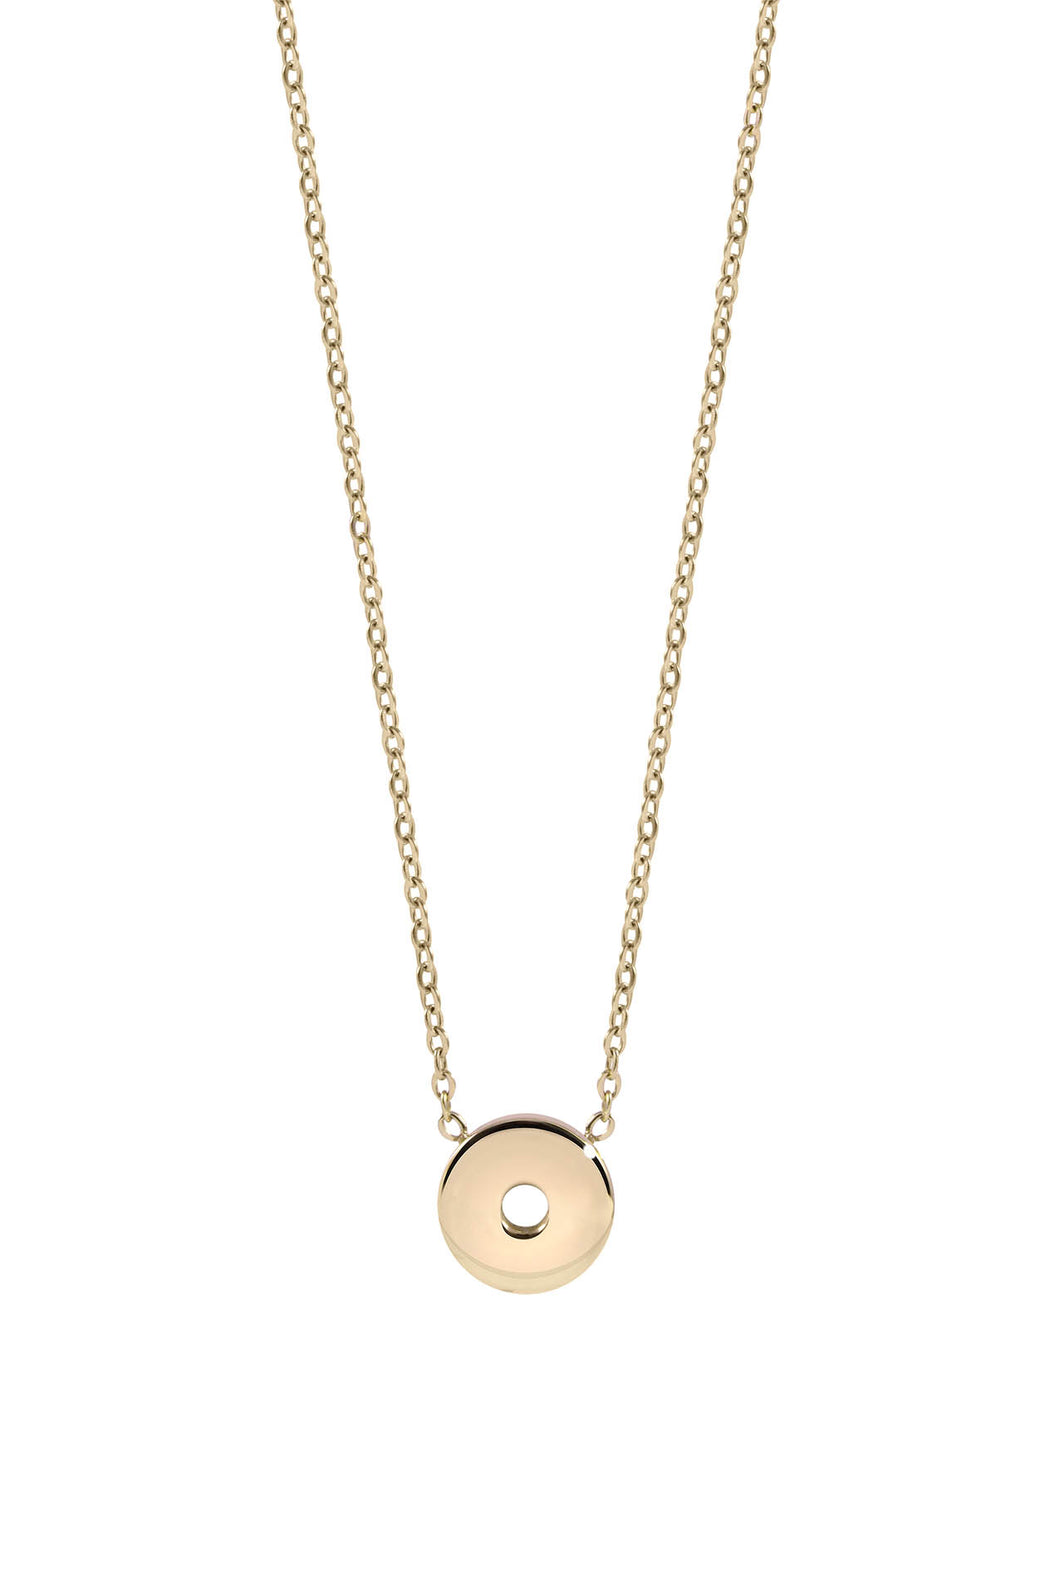 QUDO INTERCHANGEABLE SEZZE NECKLACE - GOLD PLATED